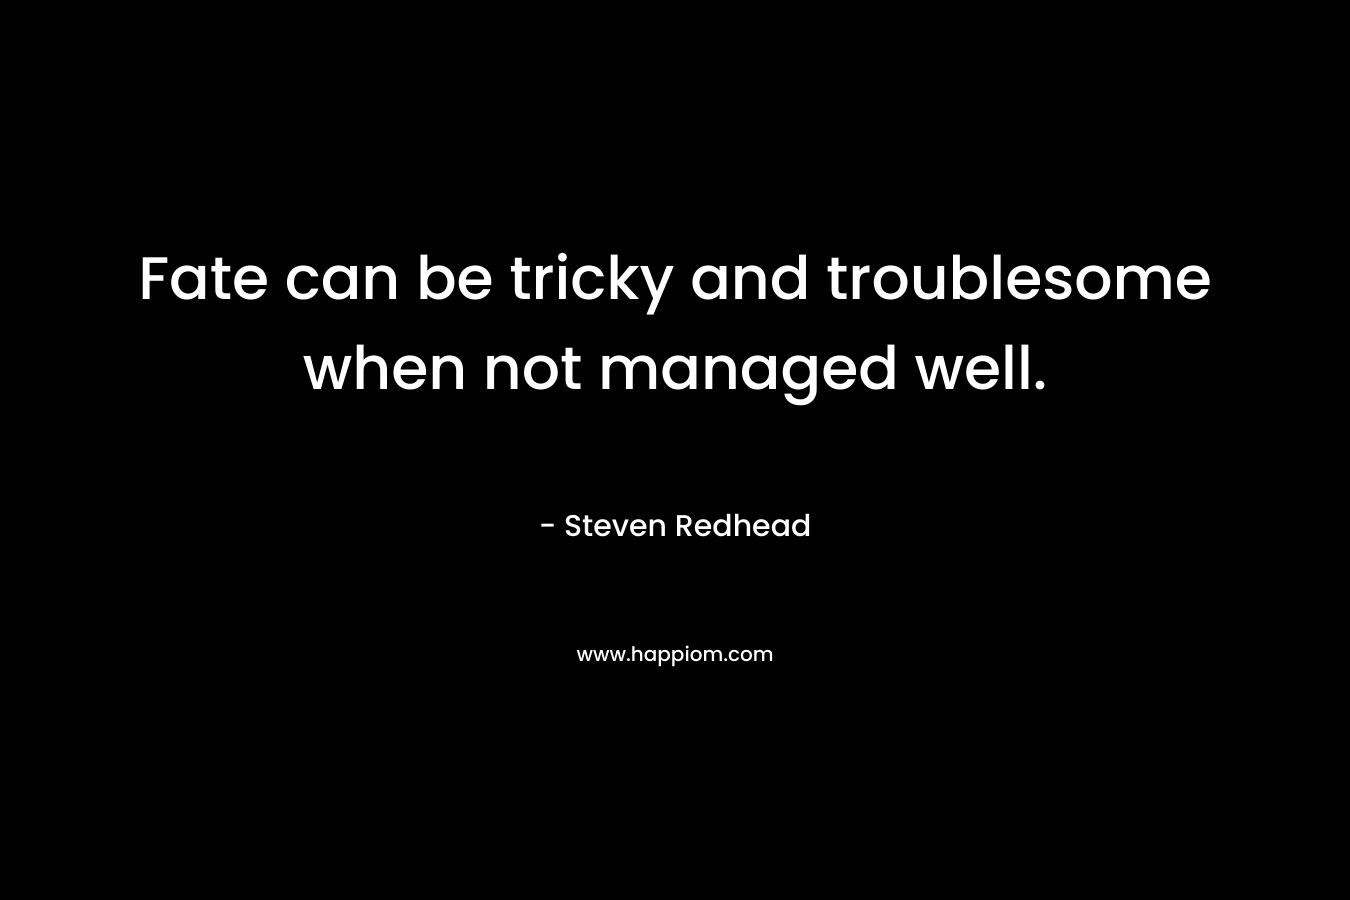 Fate can be tricky and troublesome when not managed well. – Steven Redhead